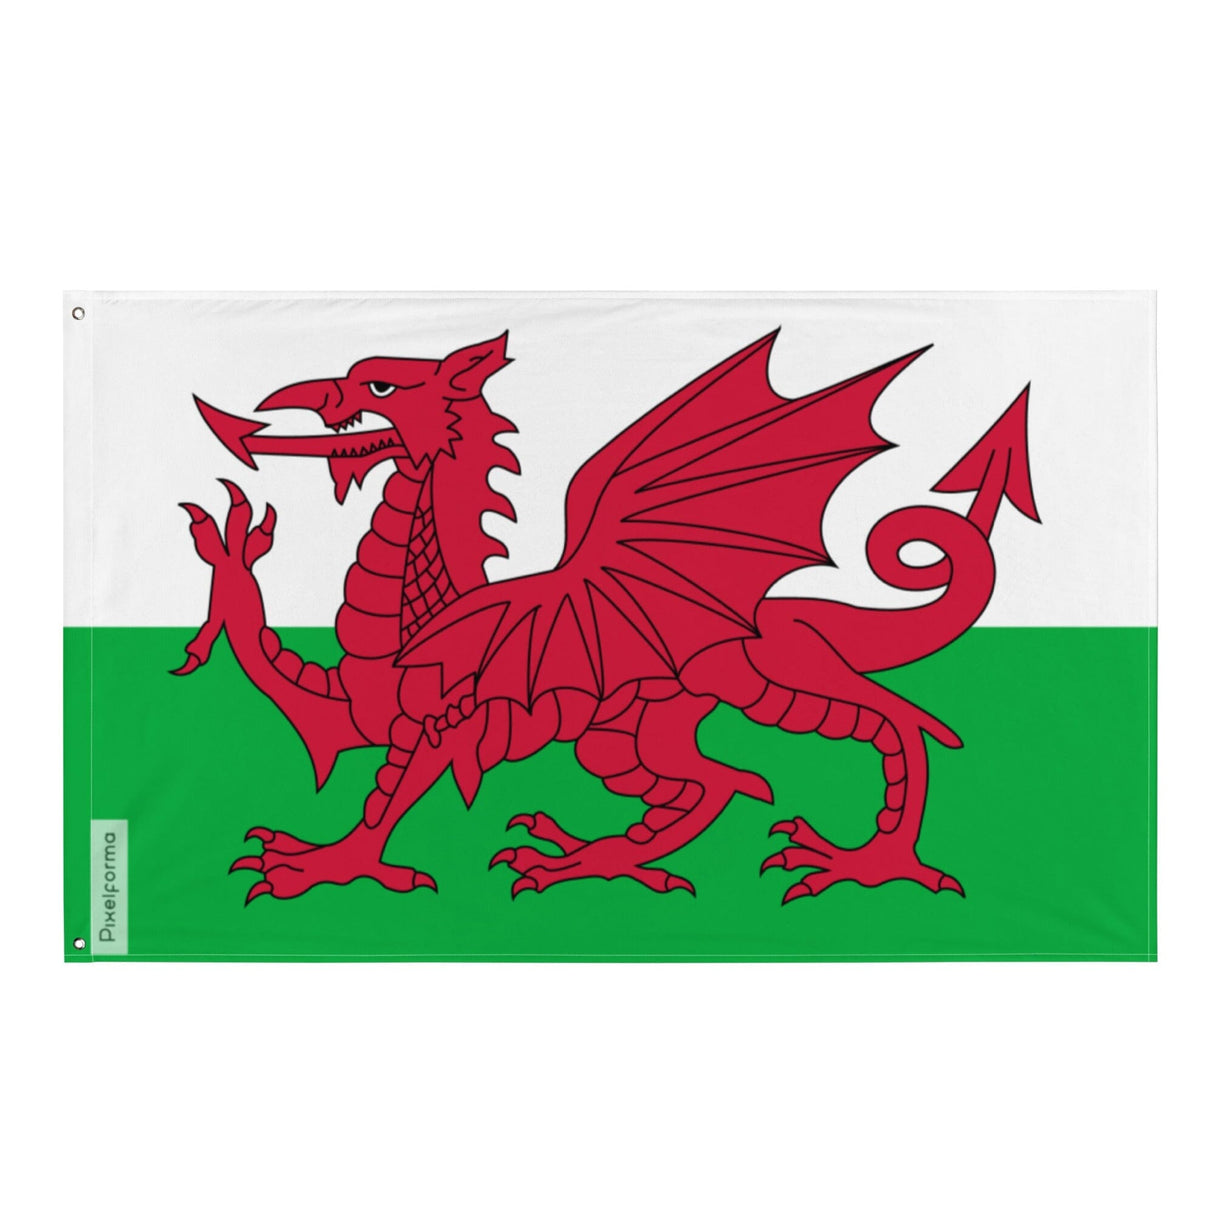 Wales Flag in Multiple Sizes 100% Polyester Print with Double Hem - Pixelforma